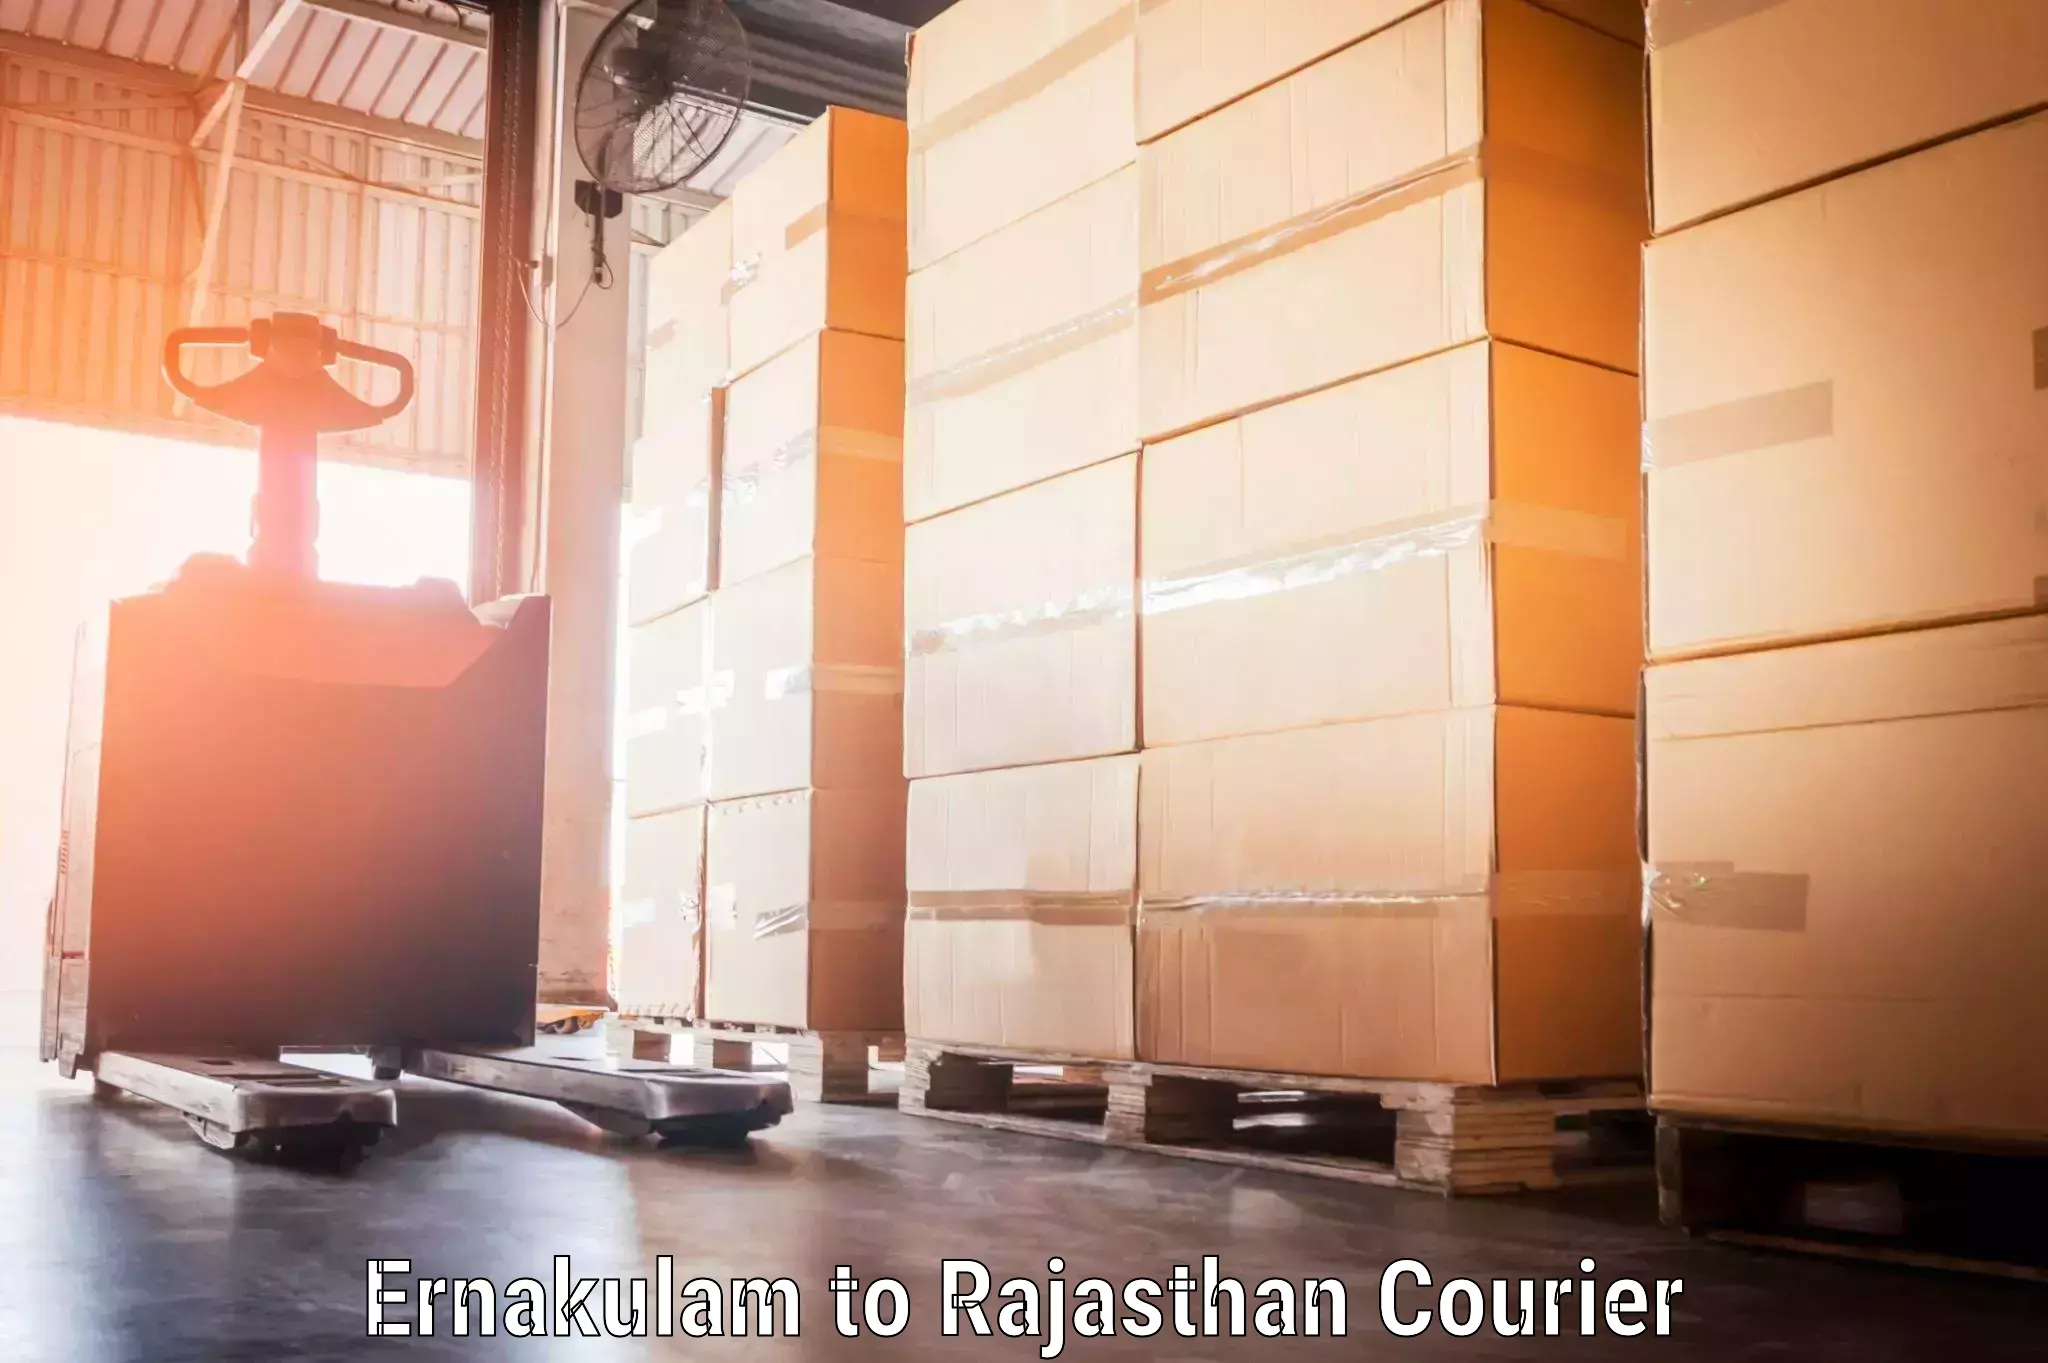 Baggage shipping schedule Ernakulam to Yeswanthapur